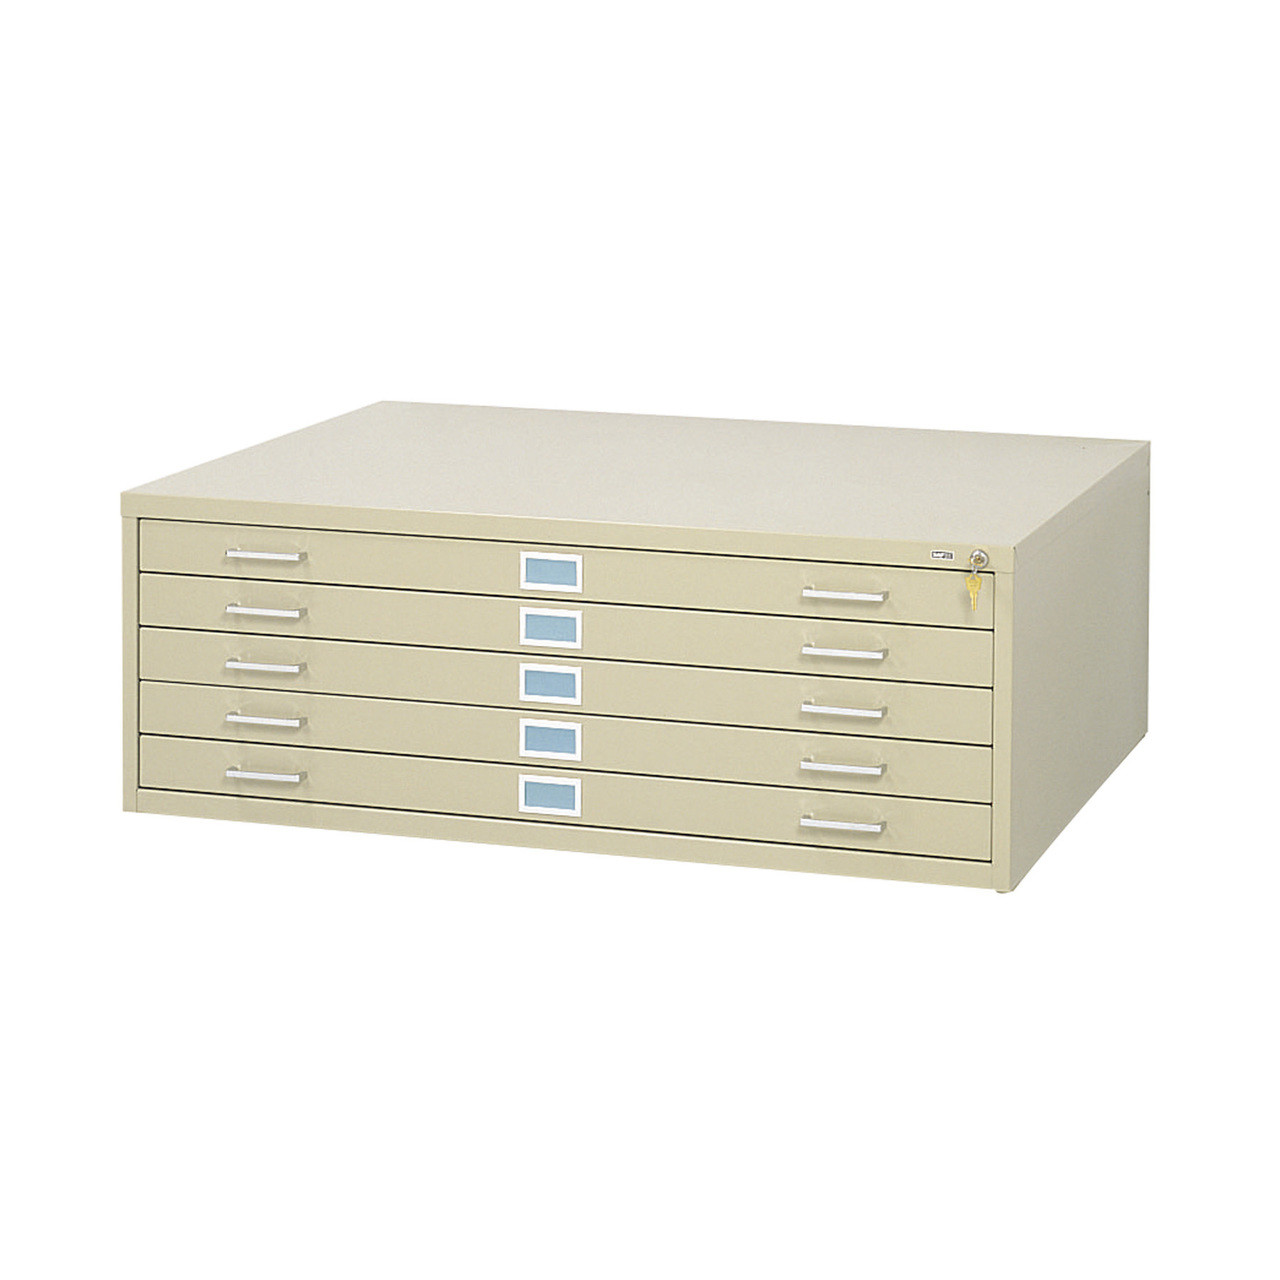 Safco 5-Drawer Steel Flat File for 30" x 42" Documents